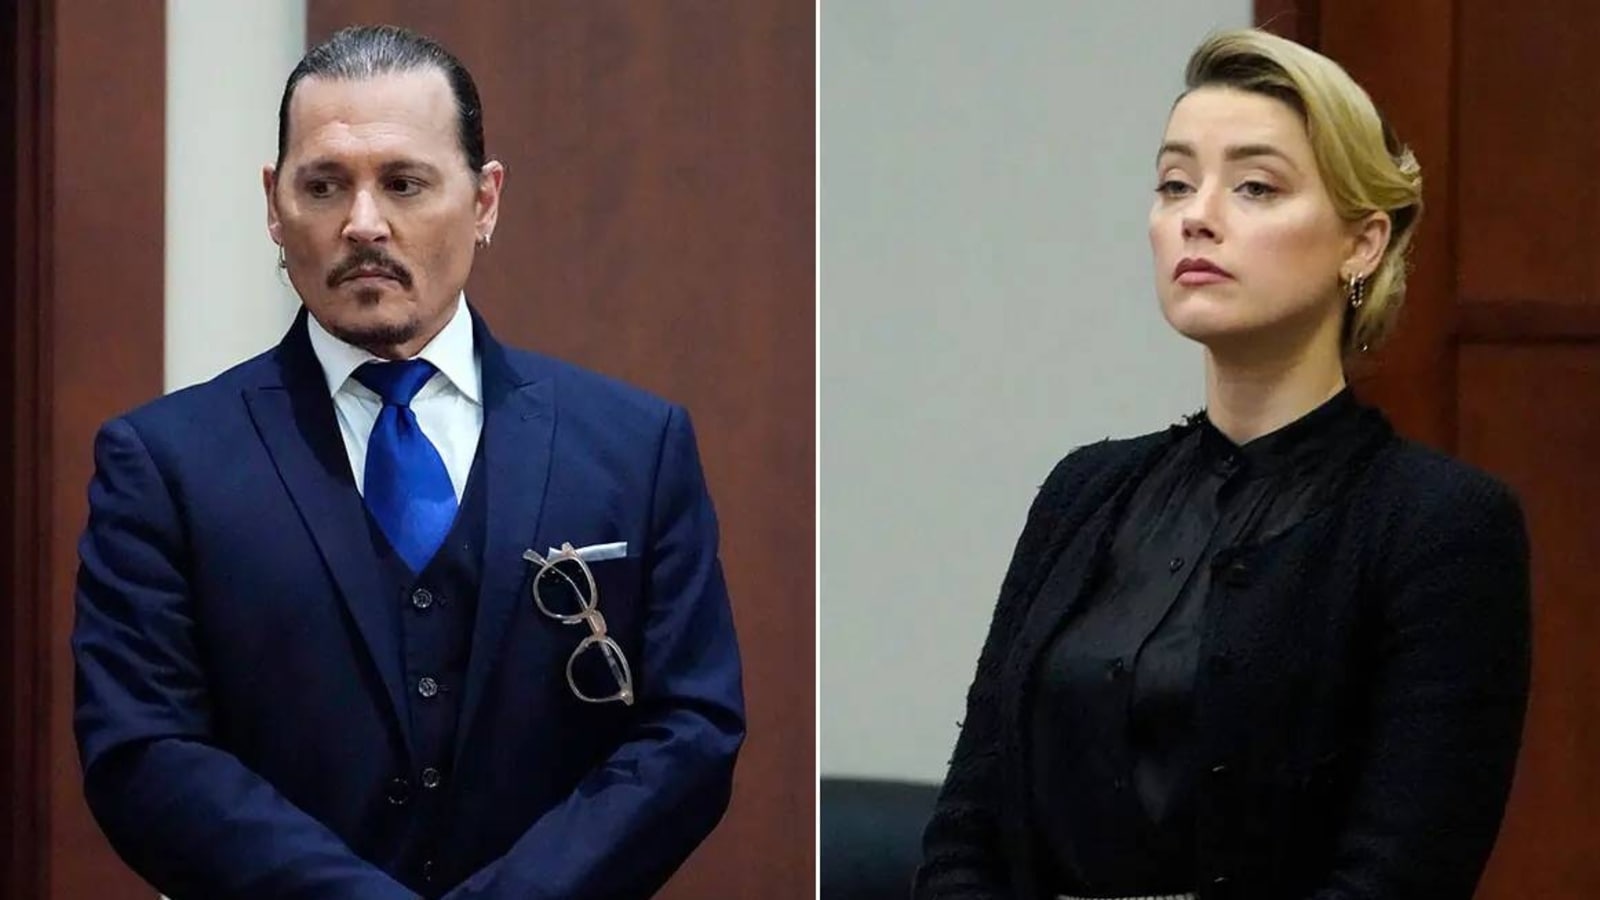 Johnny Depp, Amber Heard trial being adapted into film; fans say: 'Absolutely…' | Hollywood - Hindustan Times